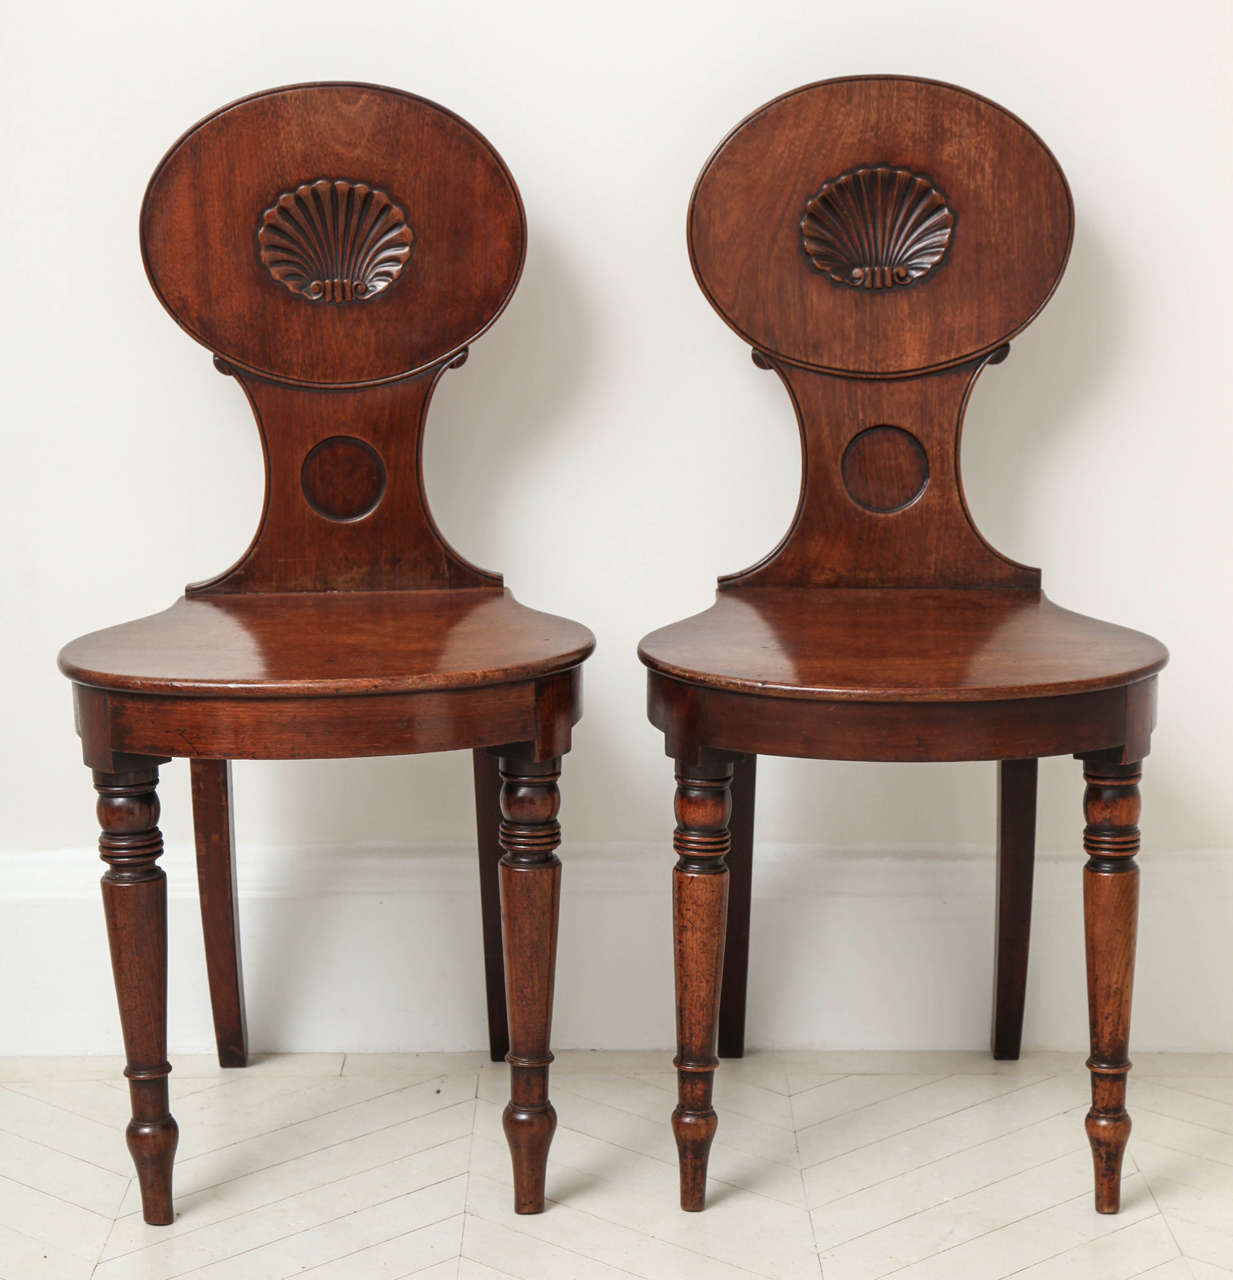 A pair of English Regency mahogany hall chairs with carved shell backs and turned front legs